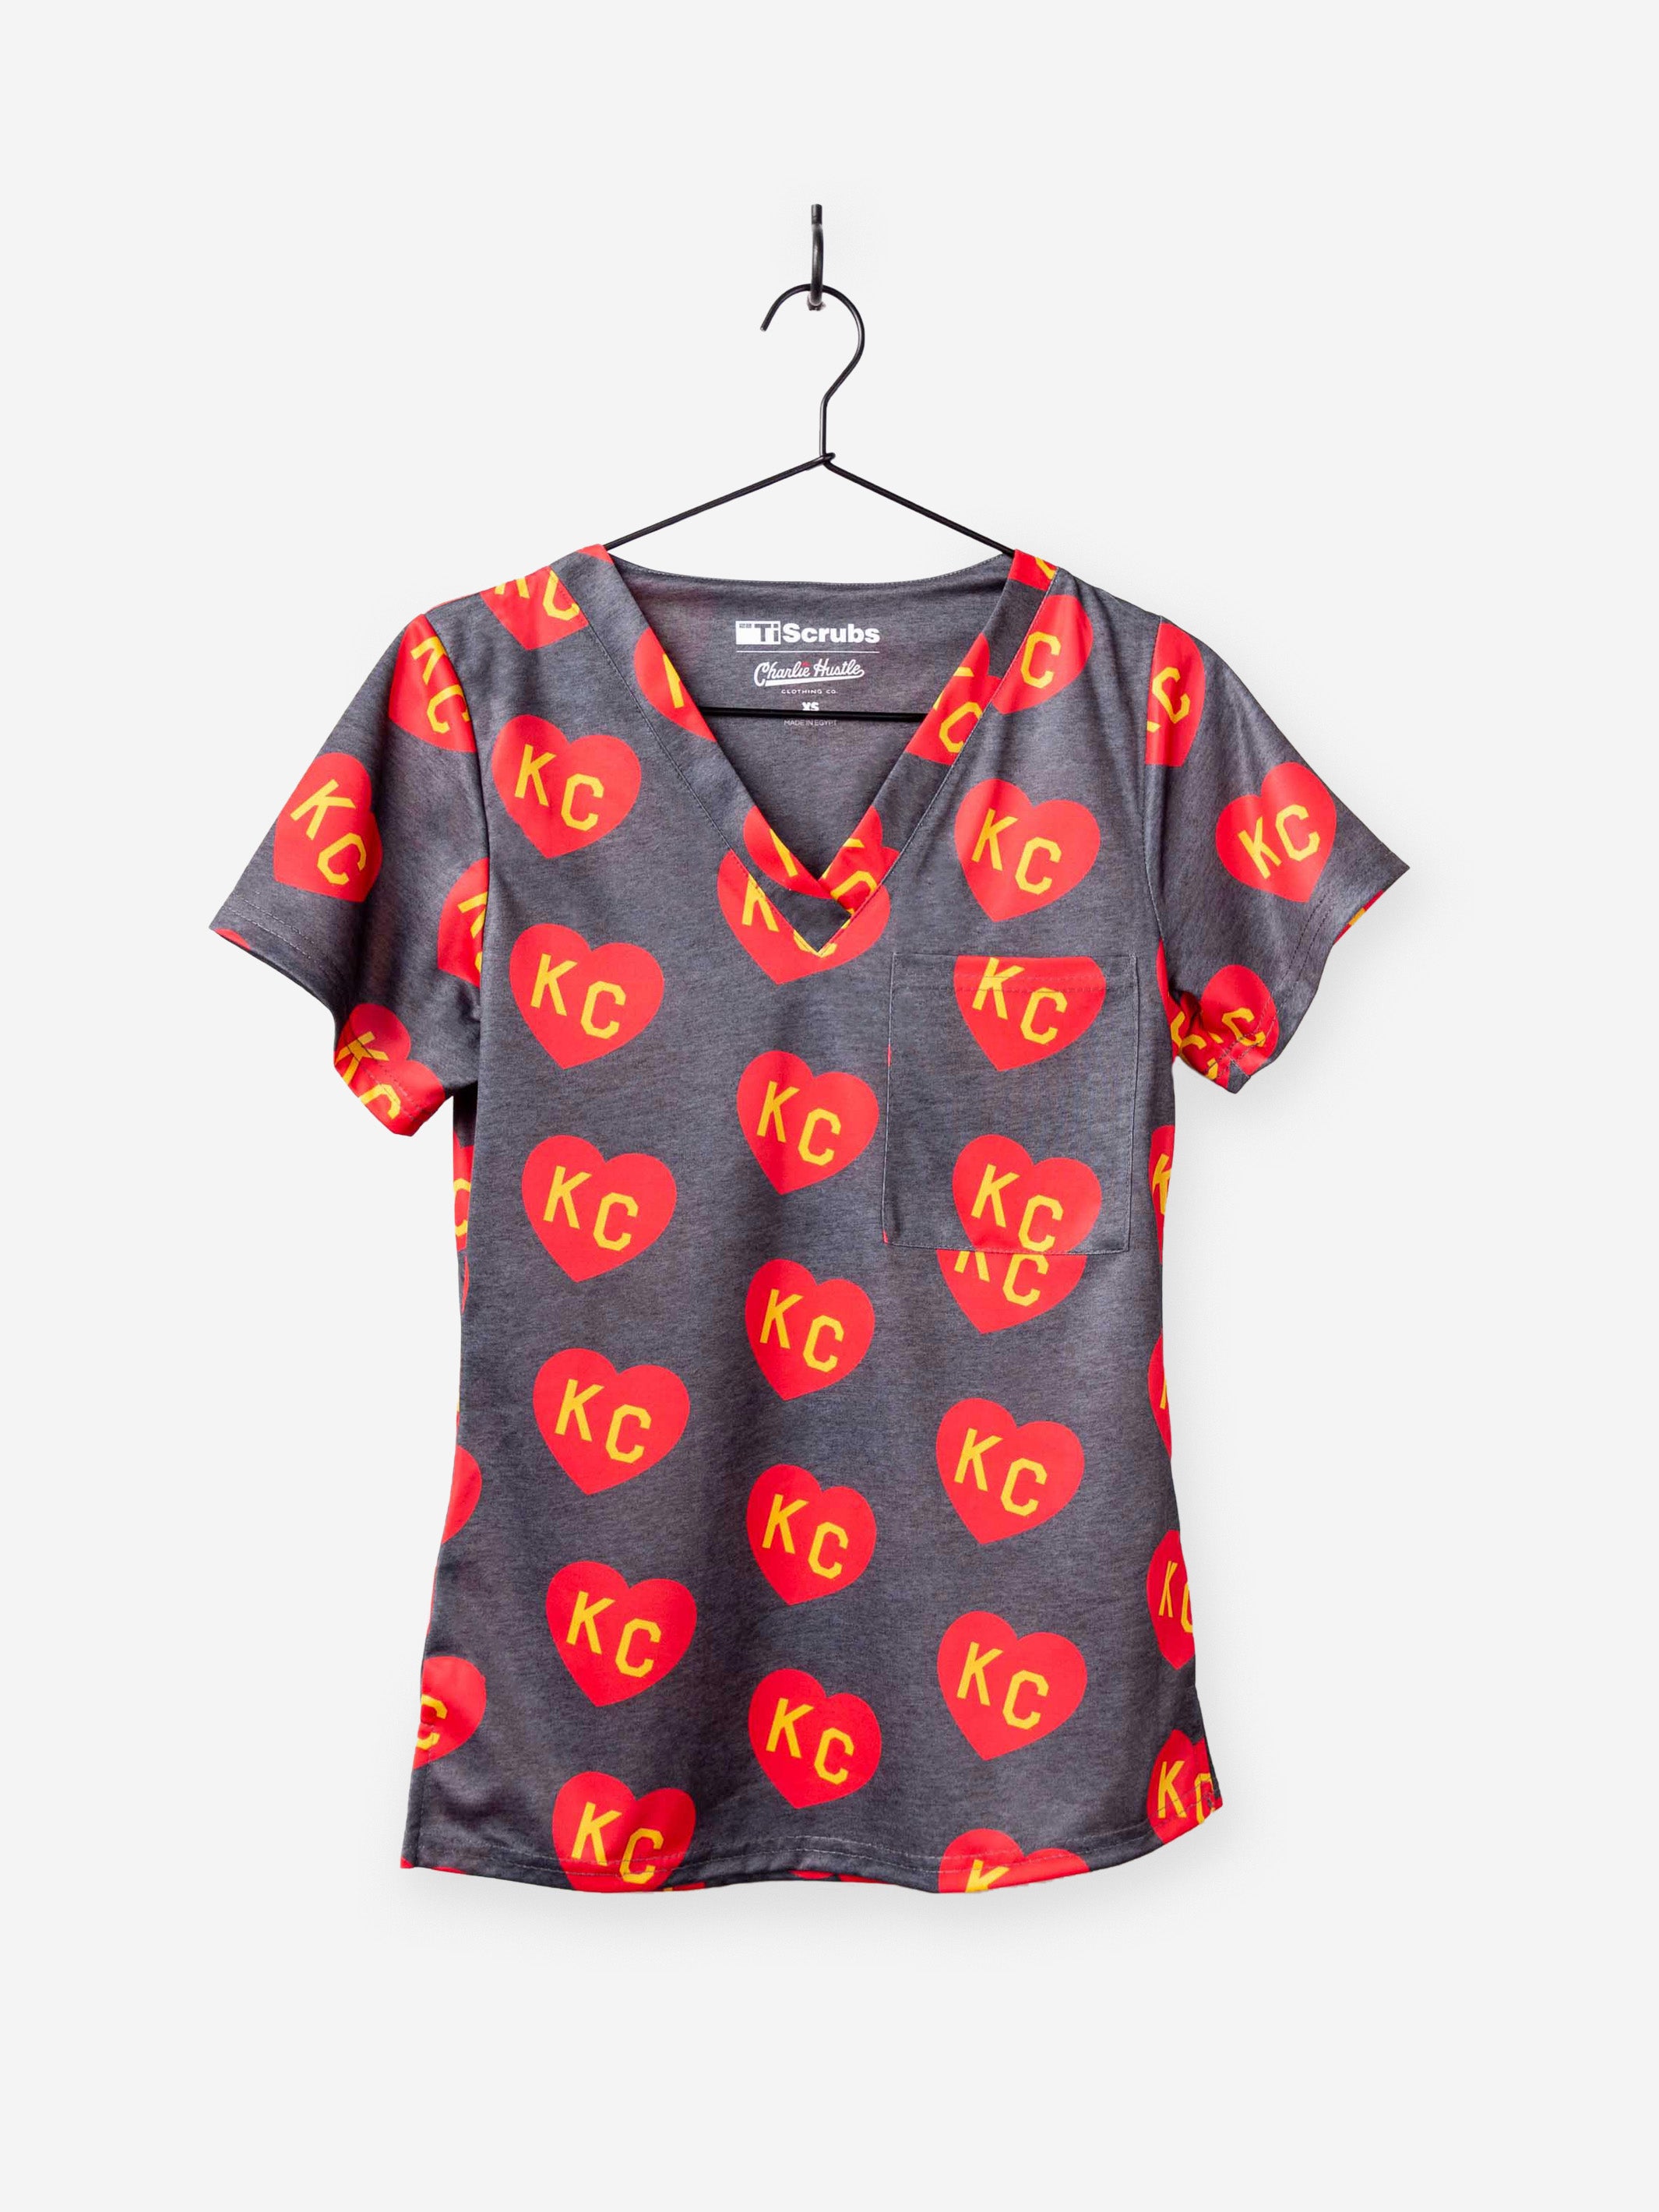 Women's Charlie Hustle Print Scrub Top in Red and Gold hearts and 1 pocket